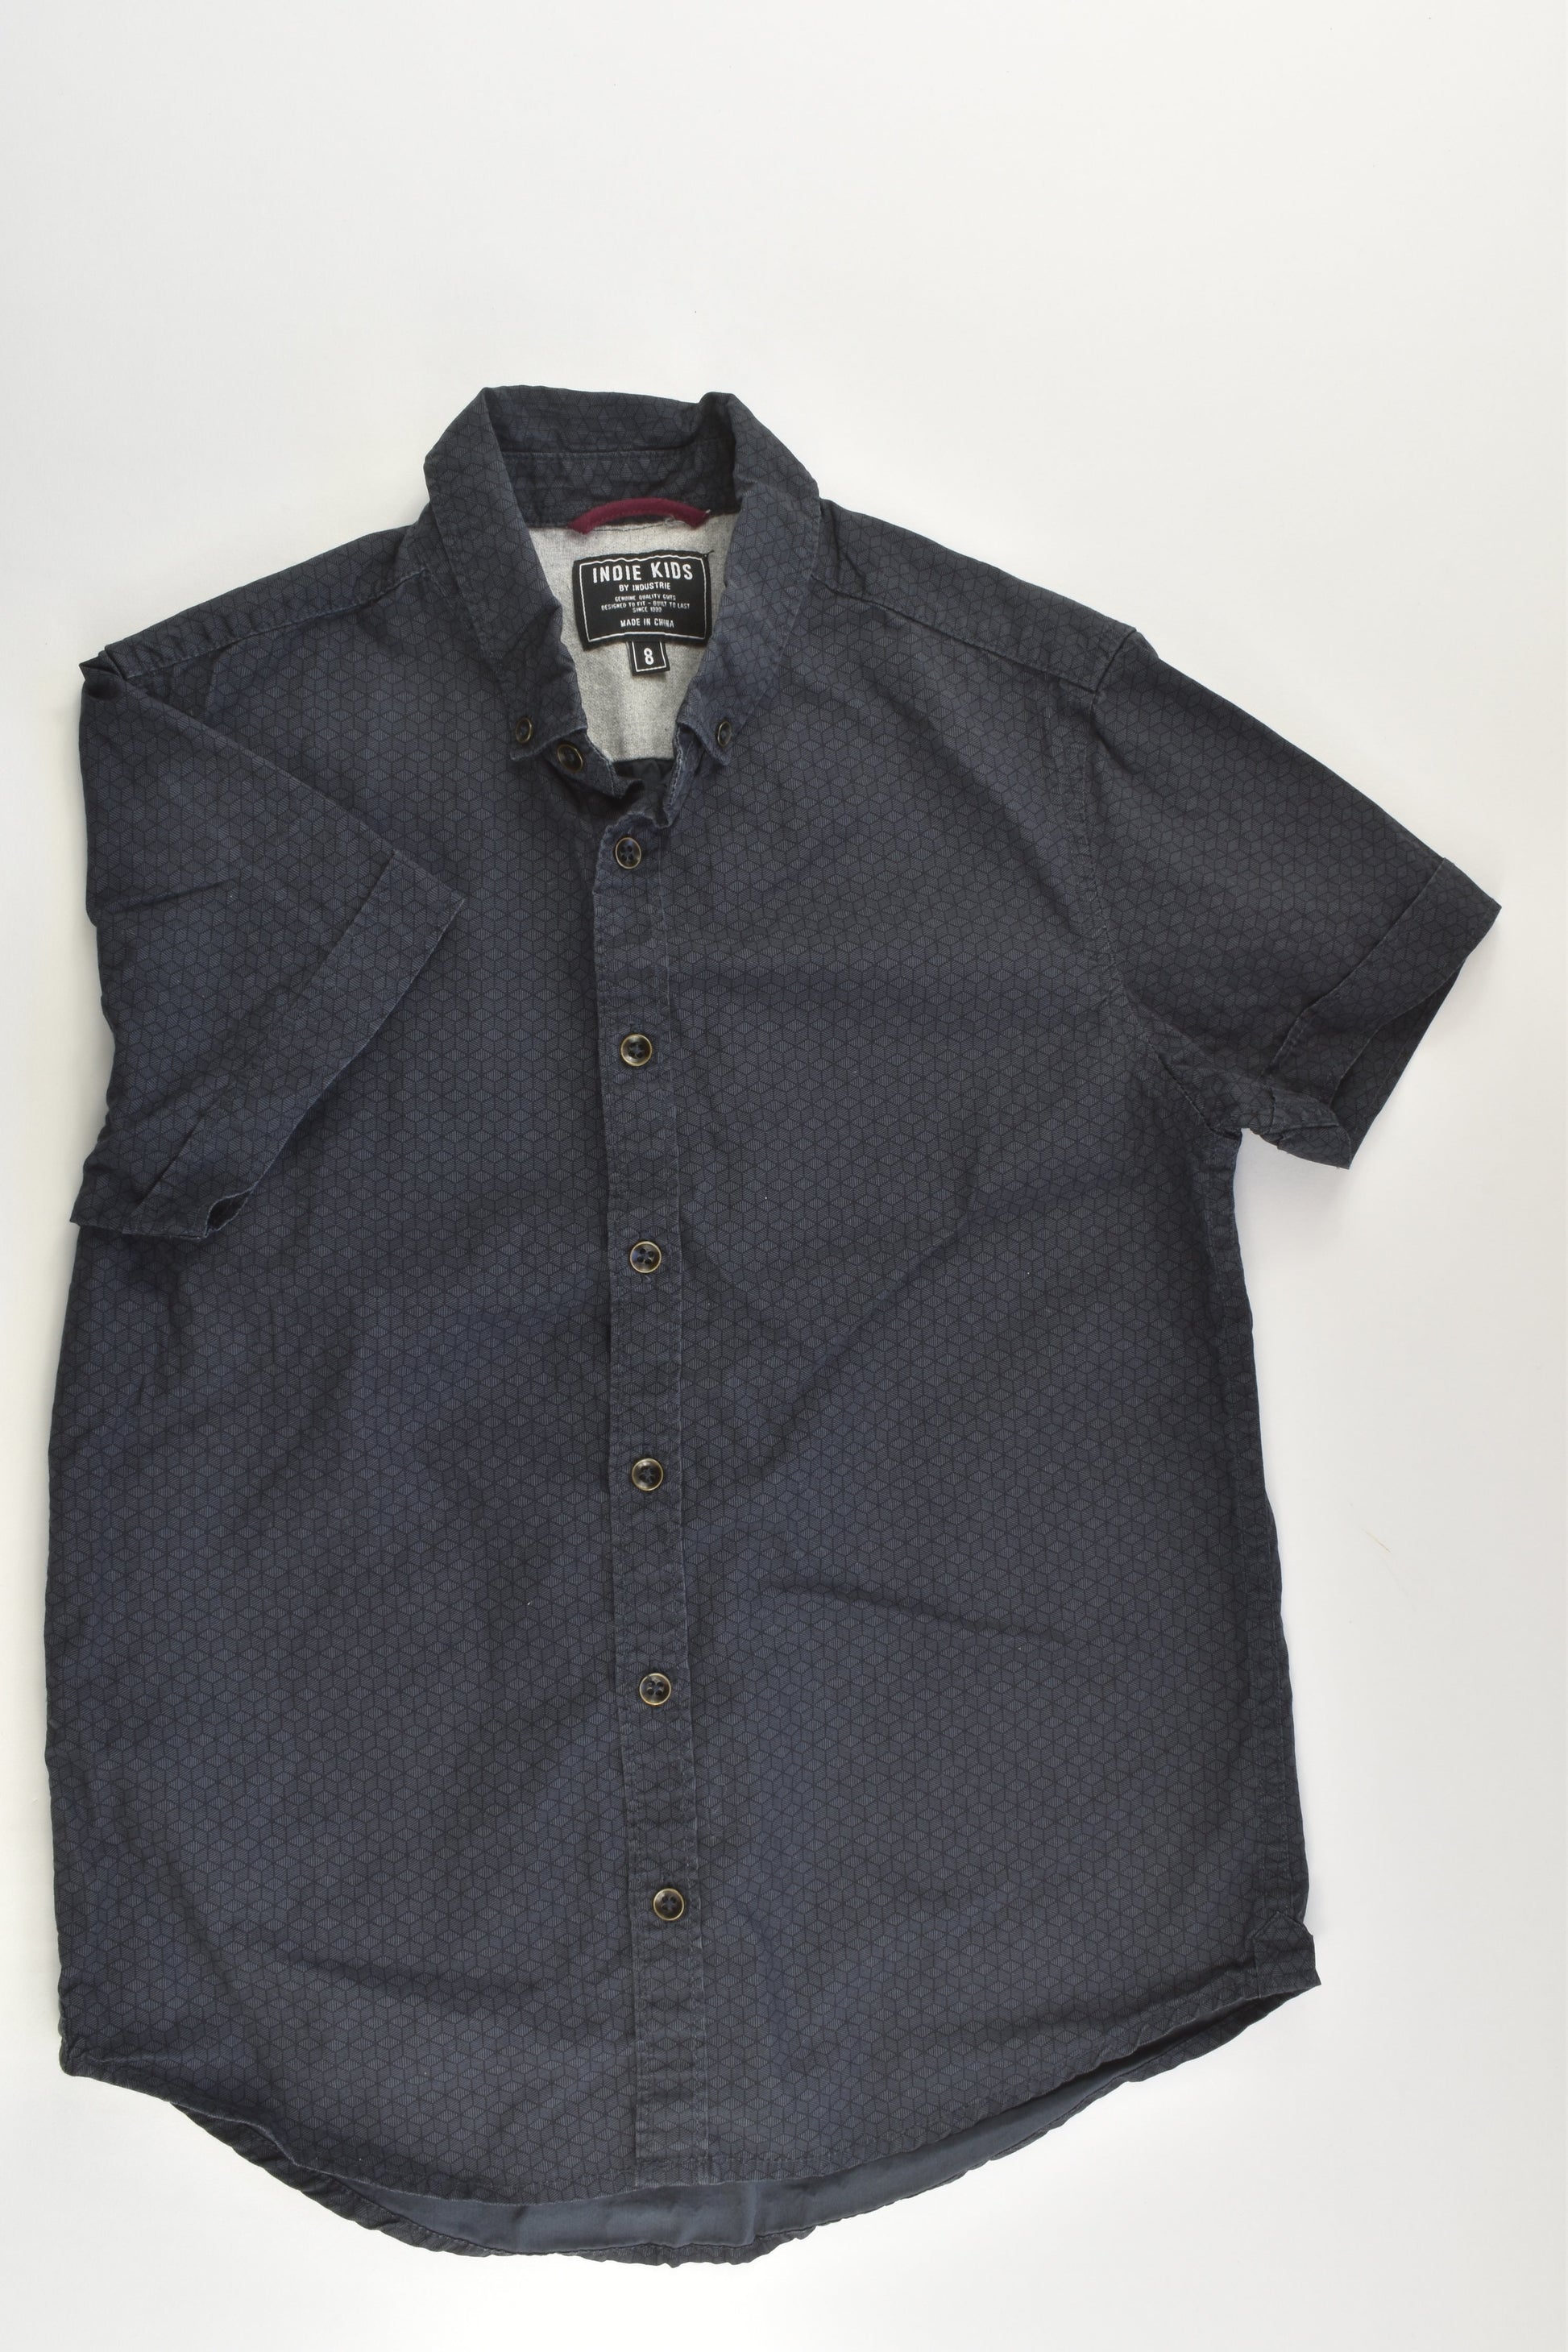 Indie Kids By Industrie Size 8 Shirt